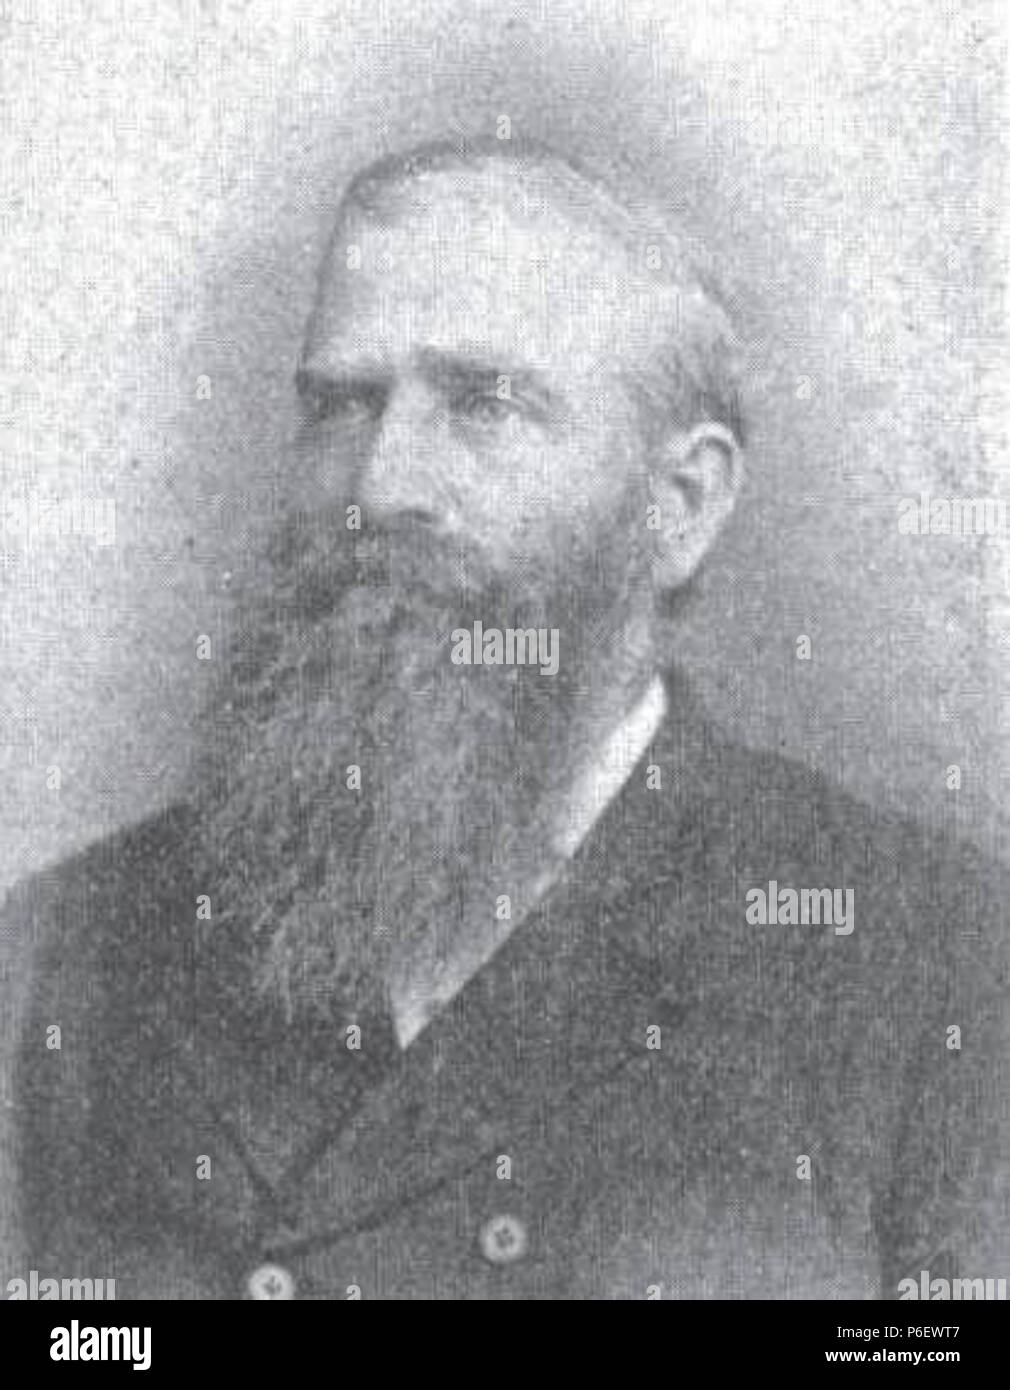 English: Photo of Charles Ora Card, the founder of the town of Cardston, Alberta, the first Mormon settlement in Canada. He has been referred to as 'Canada's Brigham Young'. 1901 9 Charles Ora Card Stock Photo